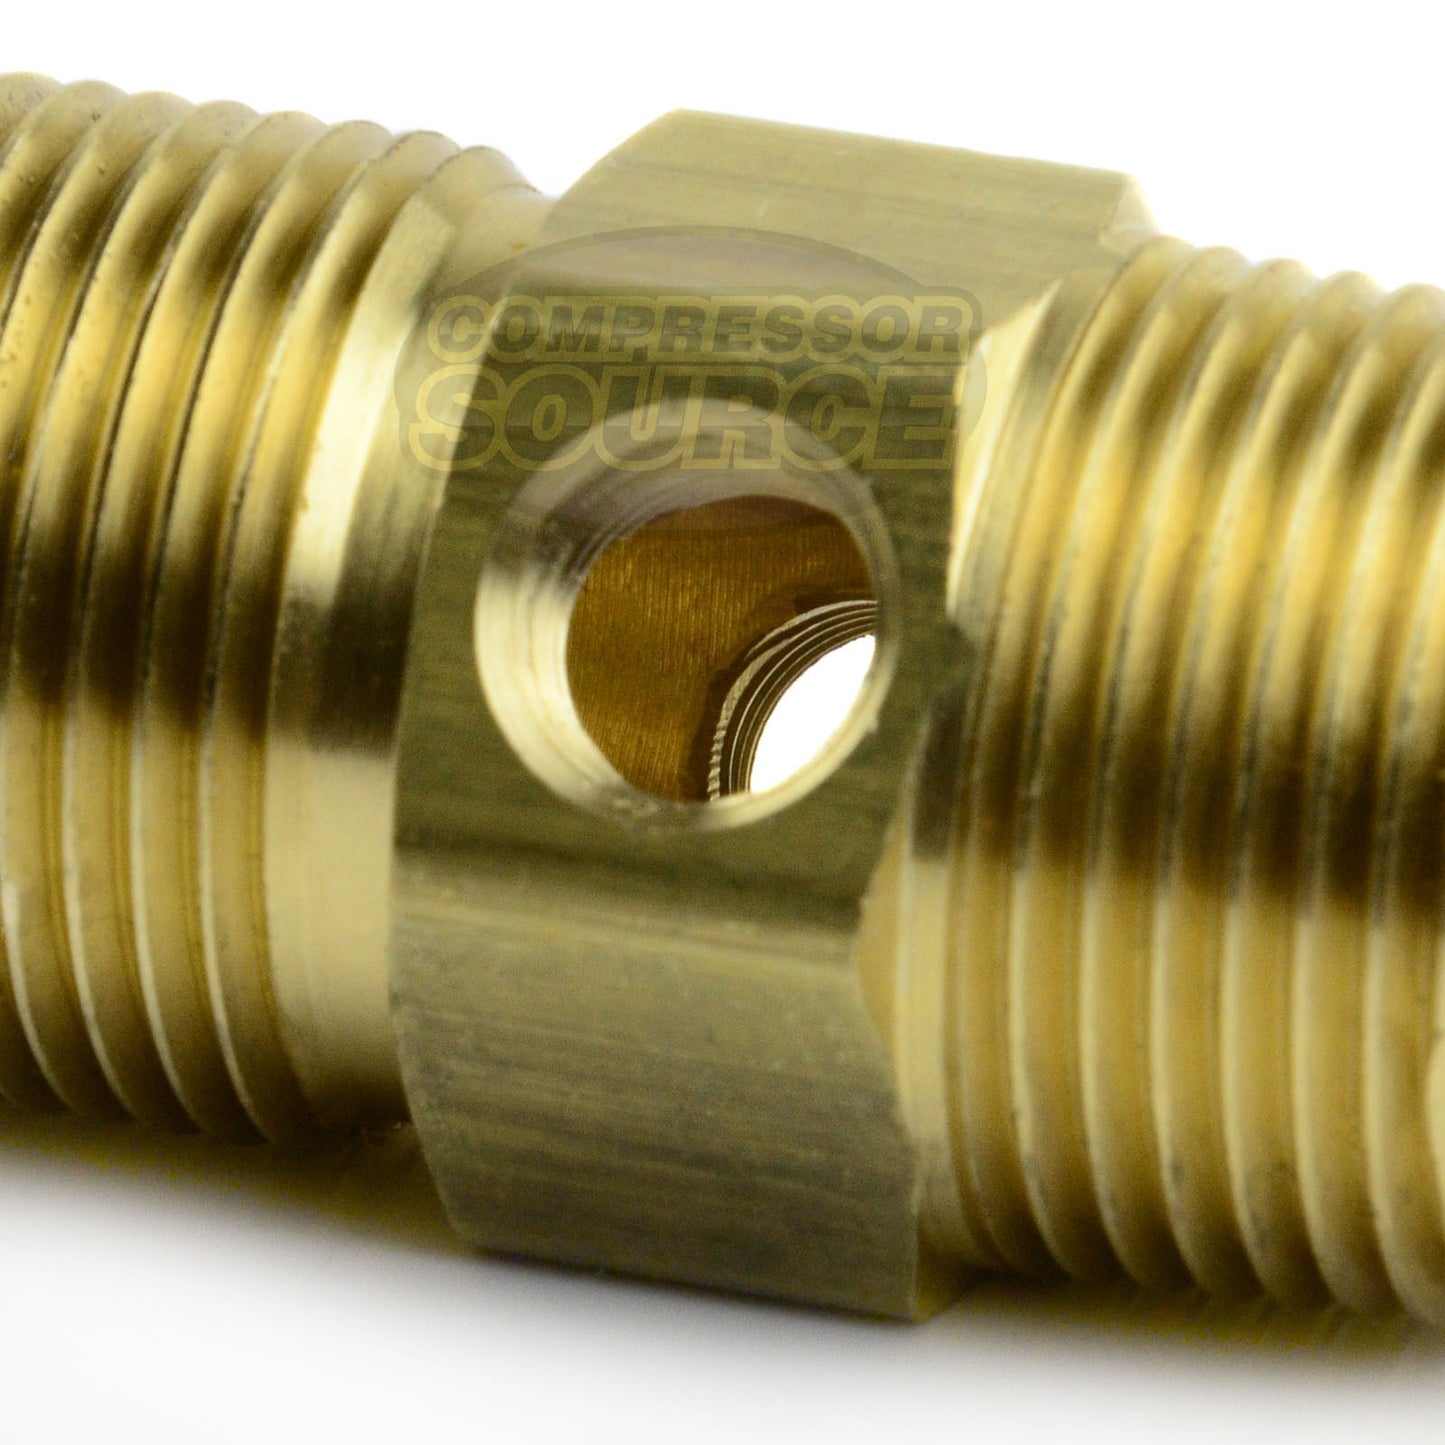 In Tank Brass Check Valve 3/4" Male NPT x 3/4" Flare with Extra Side Port